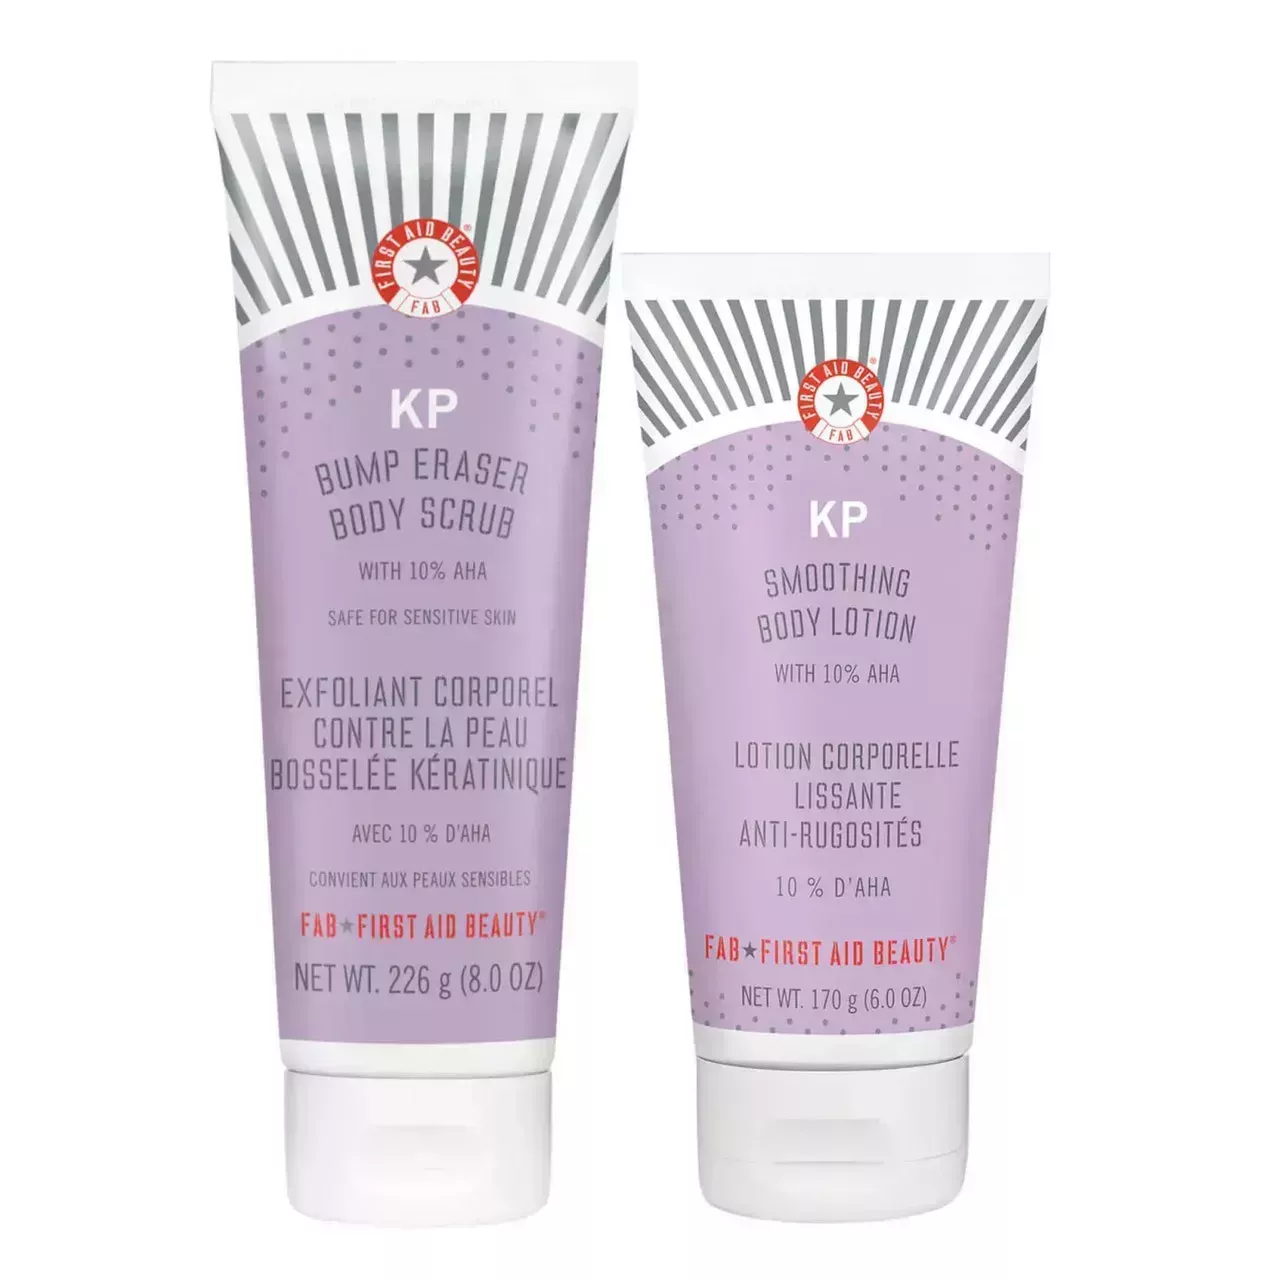 First Aid Beauty KP Body Bundle two purple tubes on white background